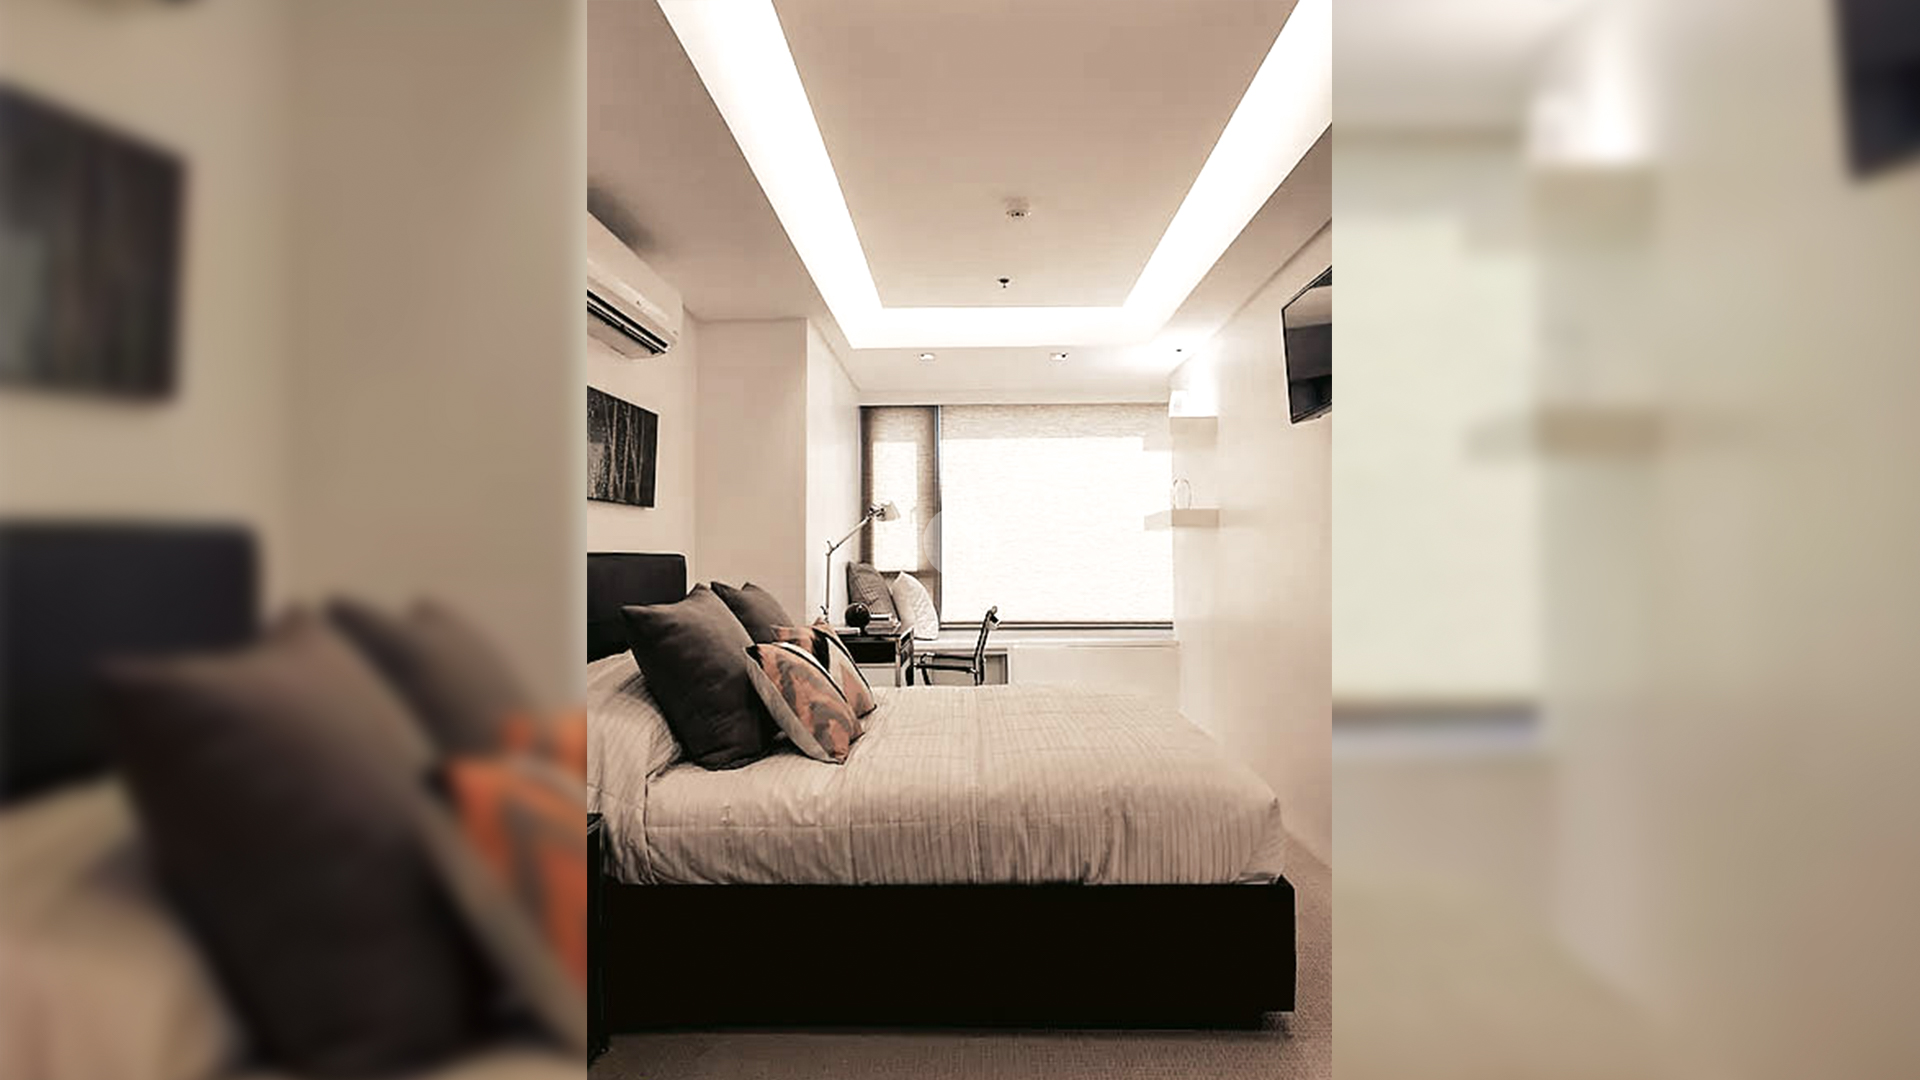 Condo Unit in Alphaland Makati by Golden Sphere Realty